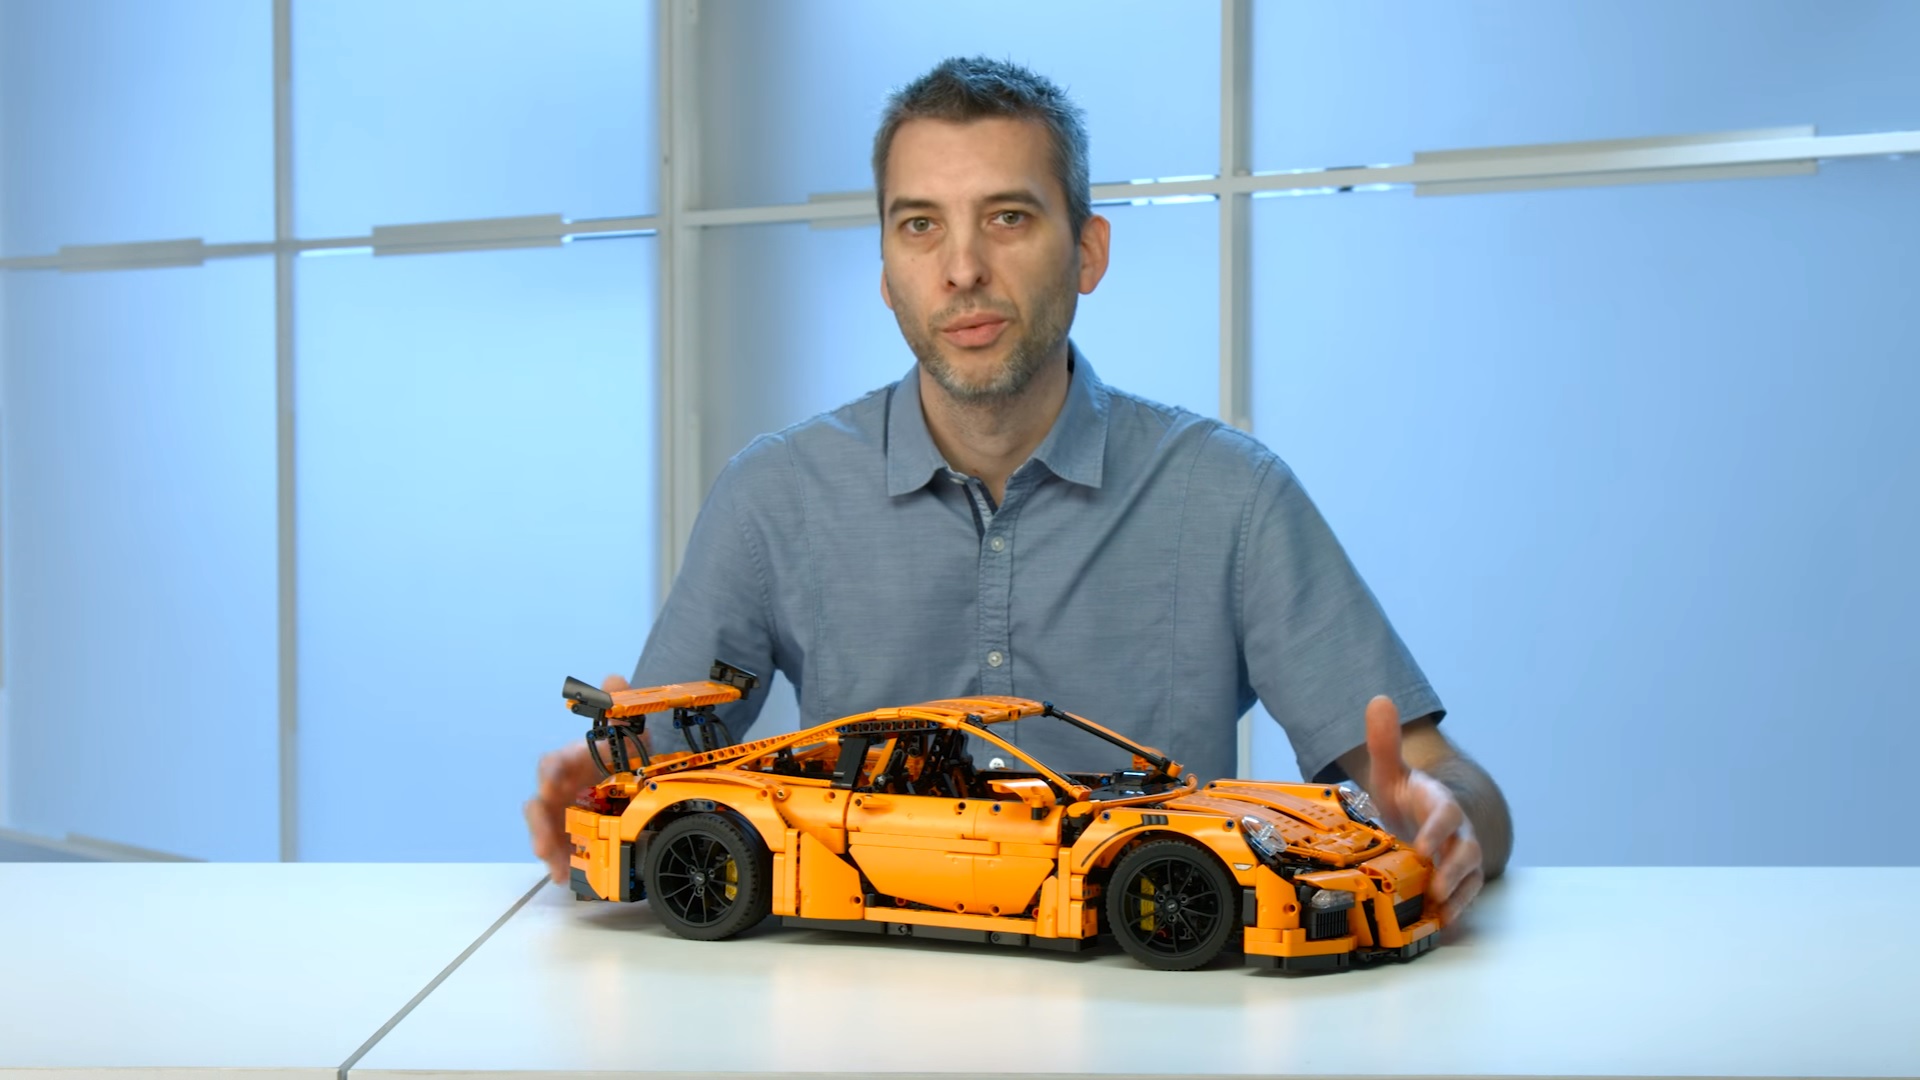 Lego’s New Porsche 911 is Comprised of 2,704 Pieces and Measures 2 Feet Long